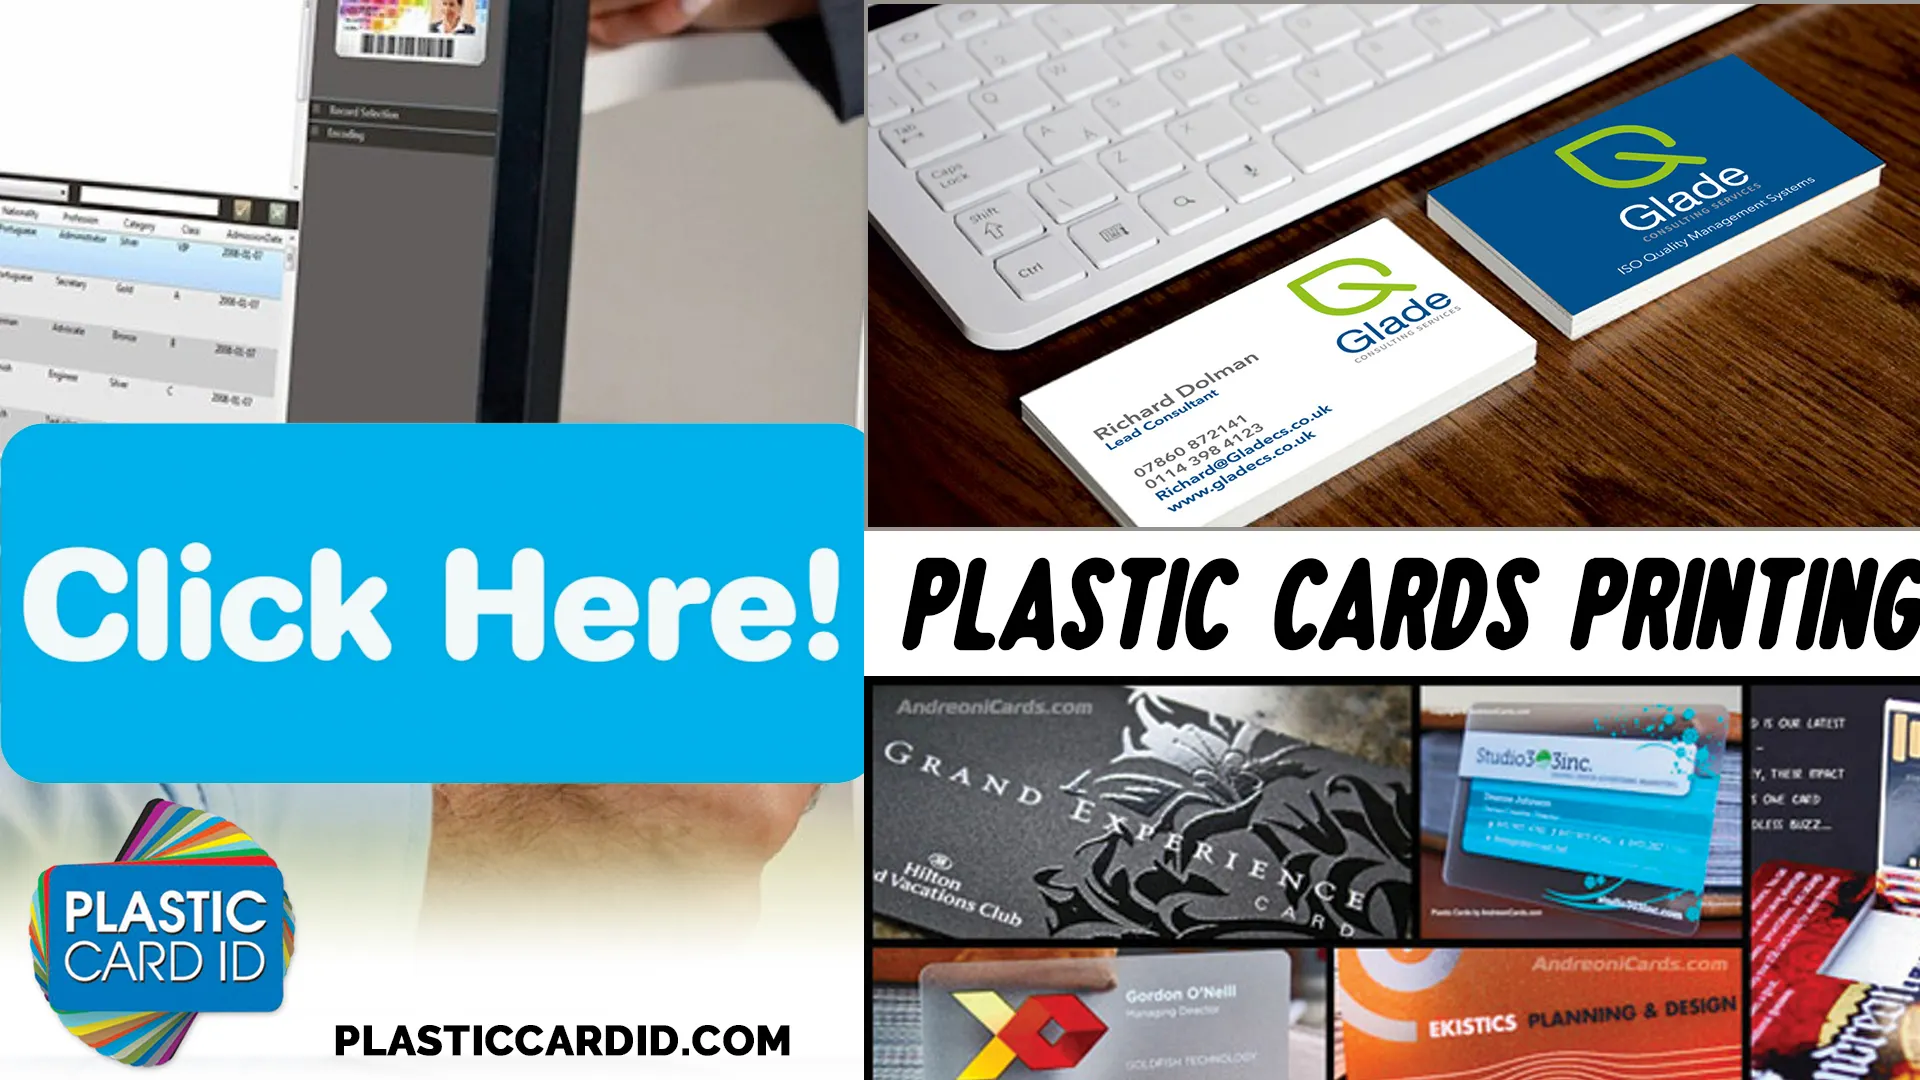 RFID Plastic Cards: Beyond Just Payments